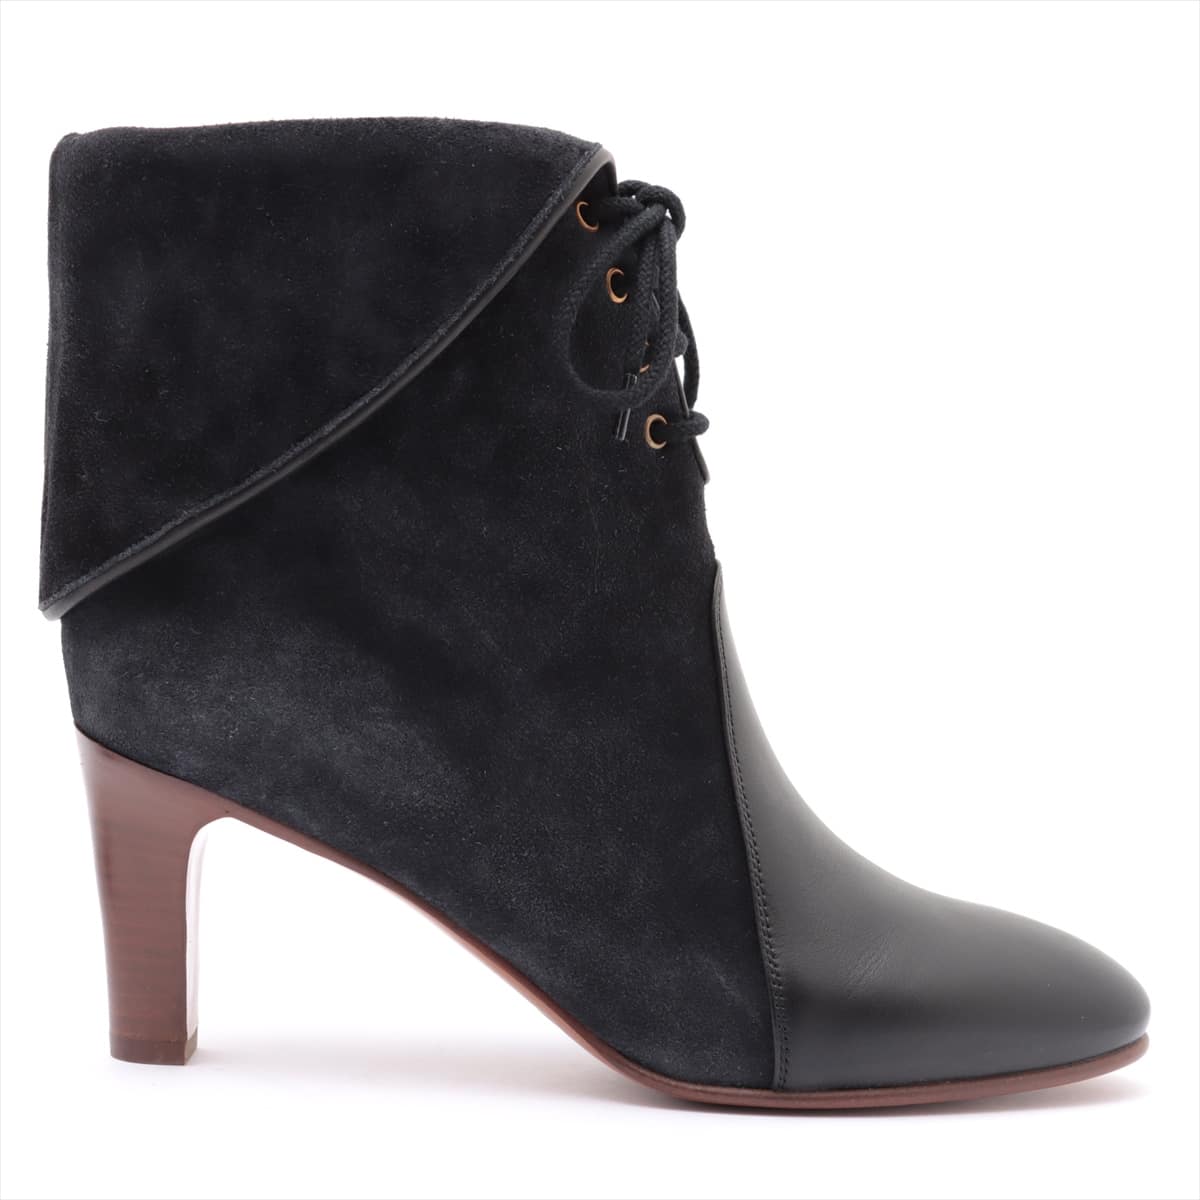 Chloe Leather & suede Short Boots 36 Ladies' Black x Gray